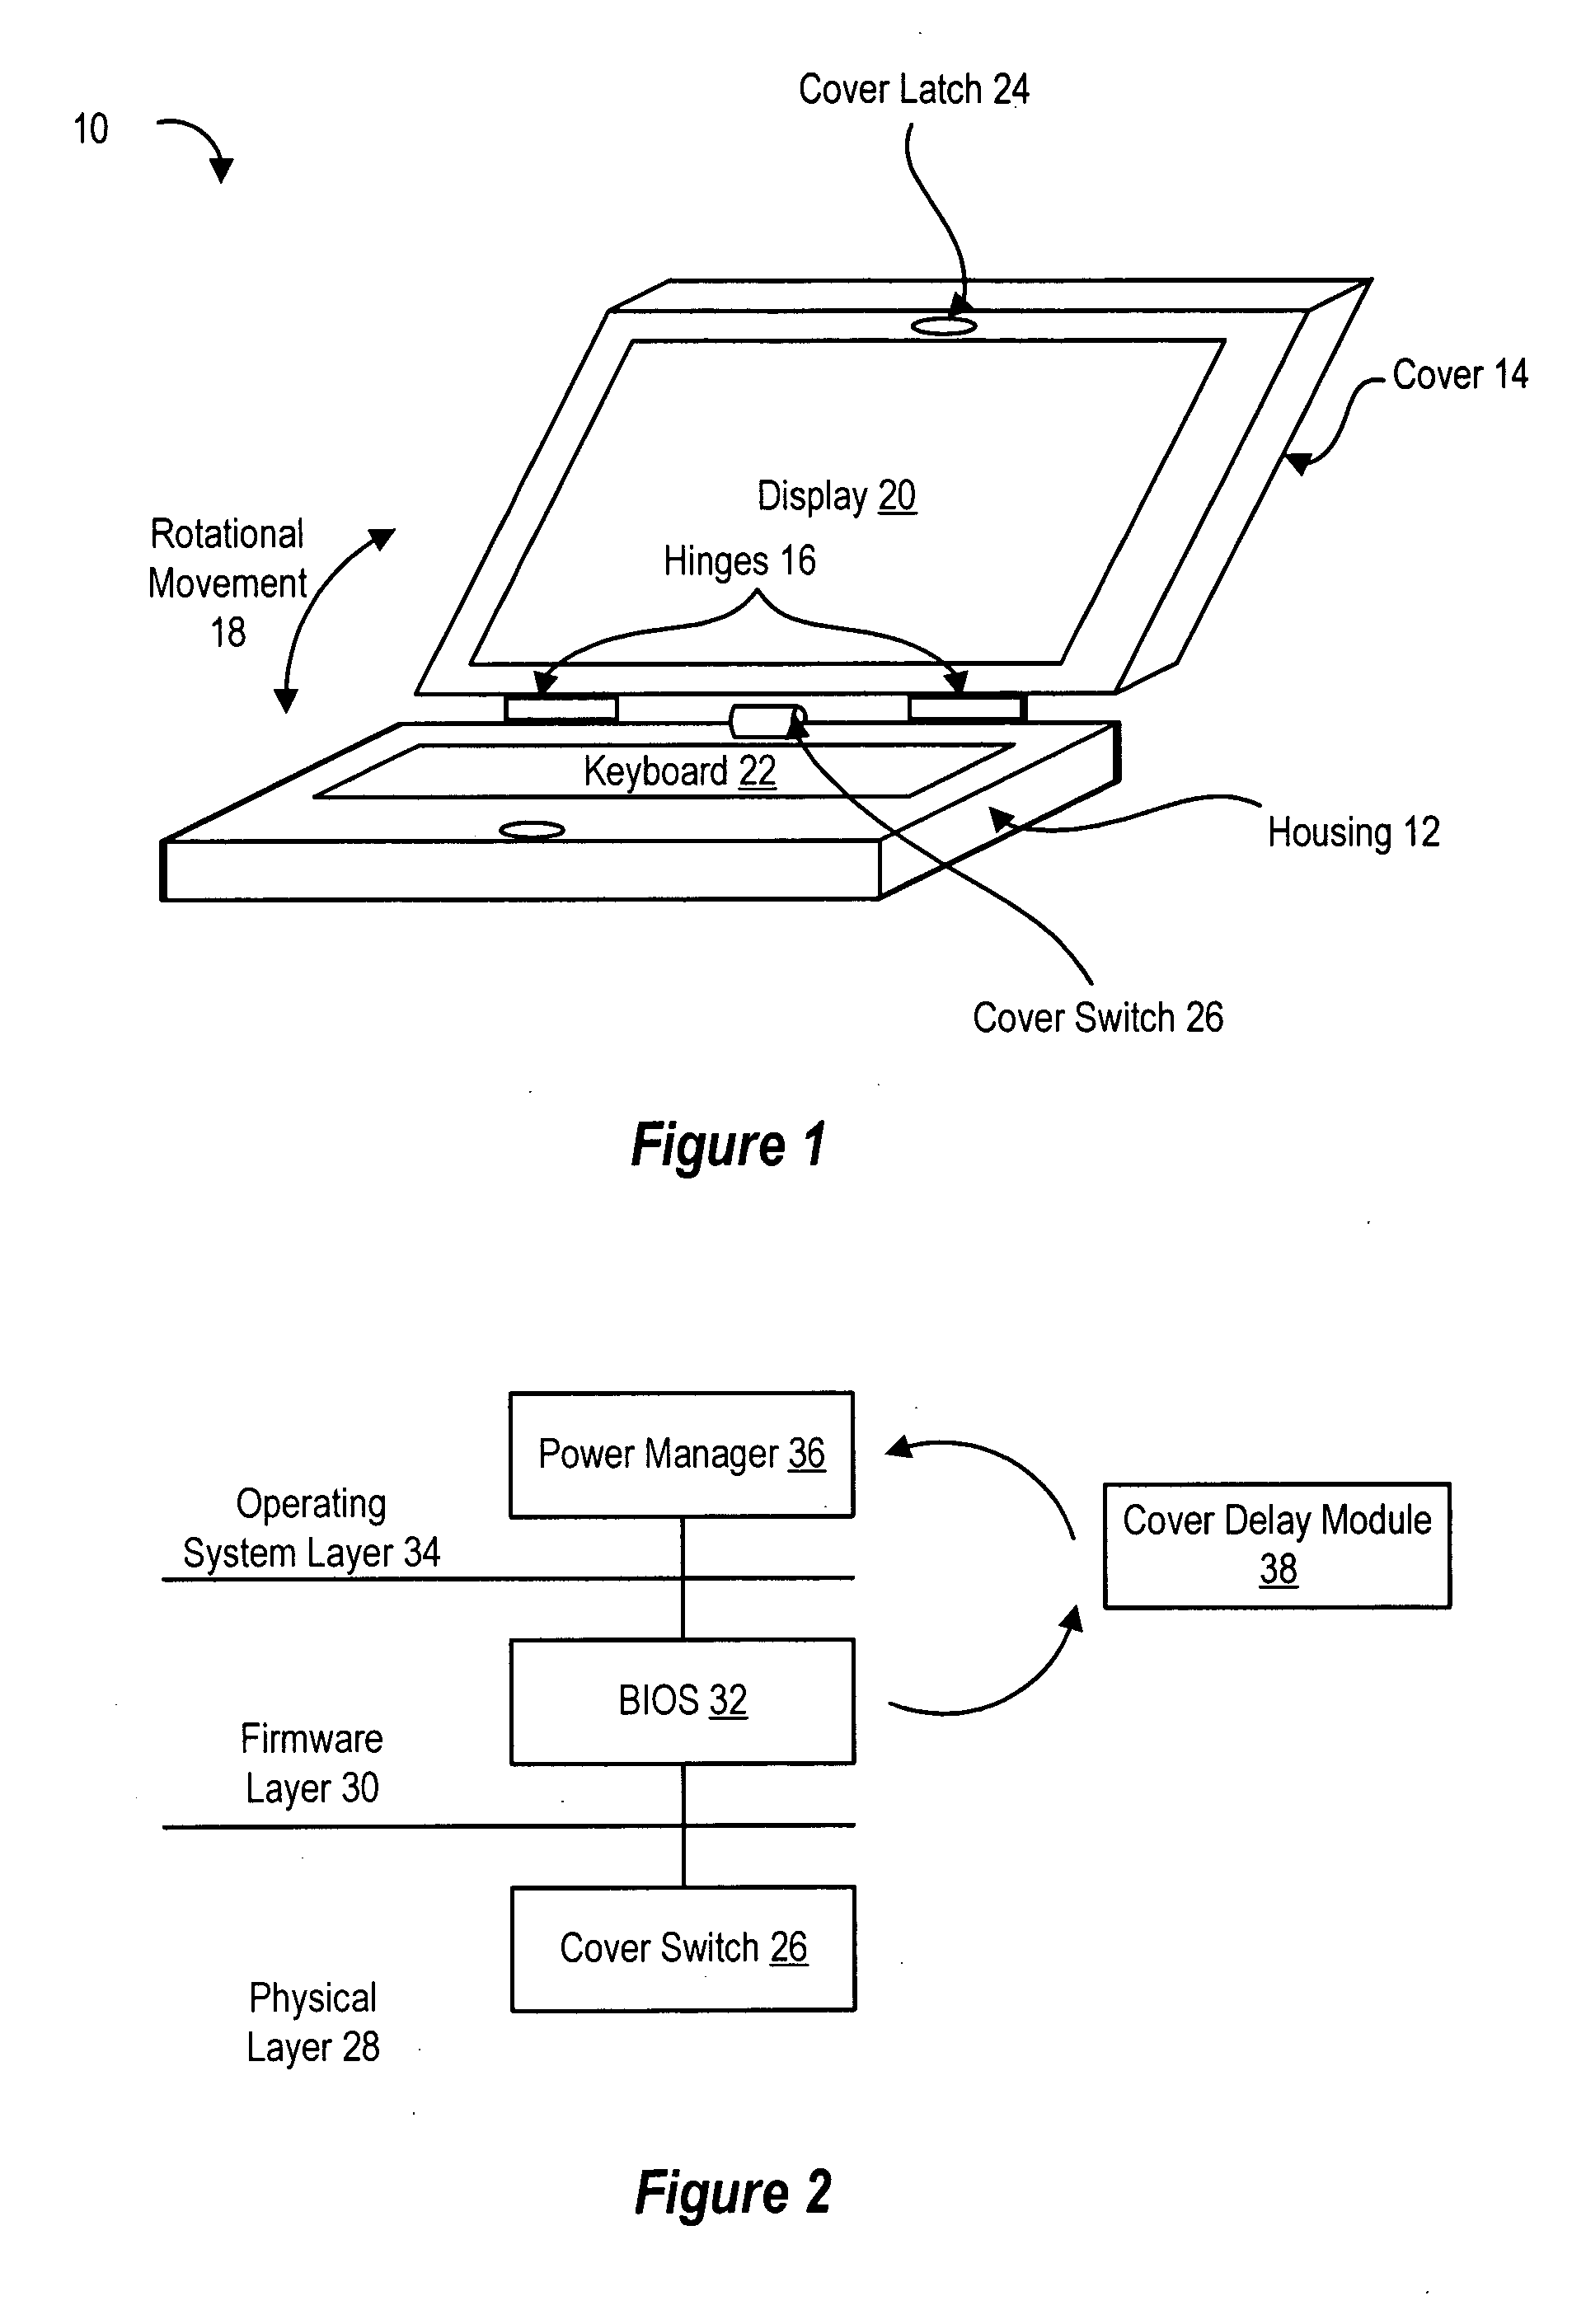 System and method for a configurable portable information handling system cover switch delay